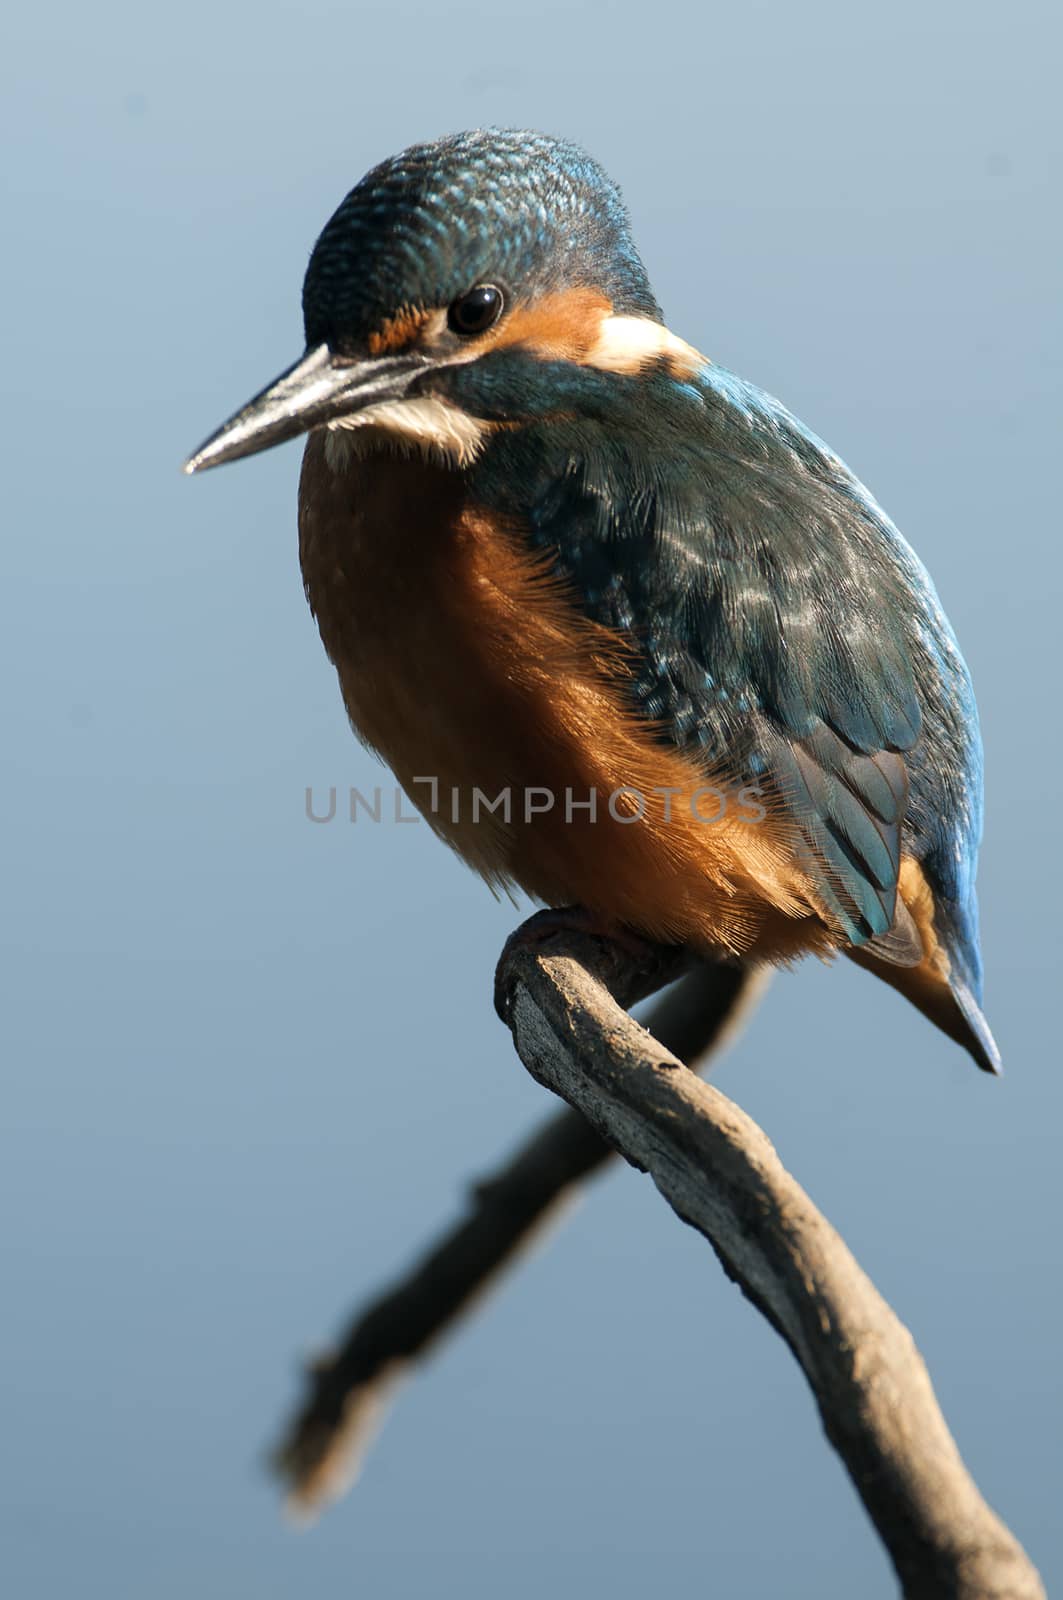 Kingfisher (Alcedo atthis) perched by jalonsohu@gmail.com